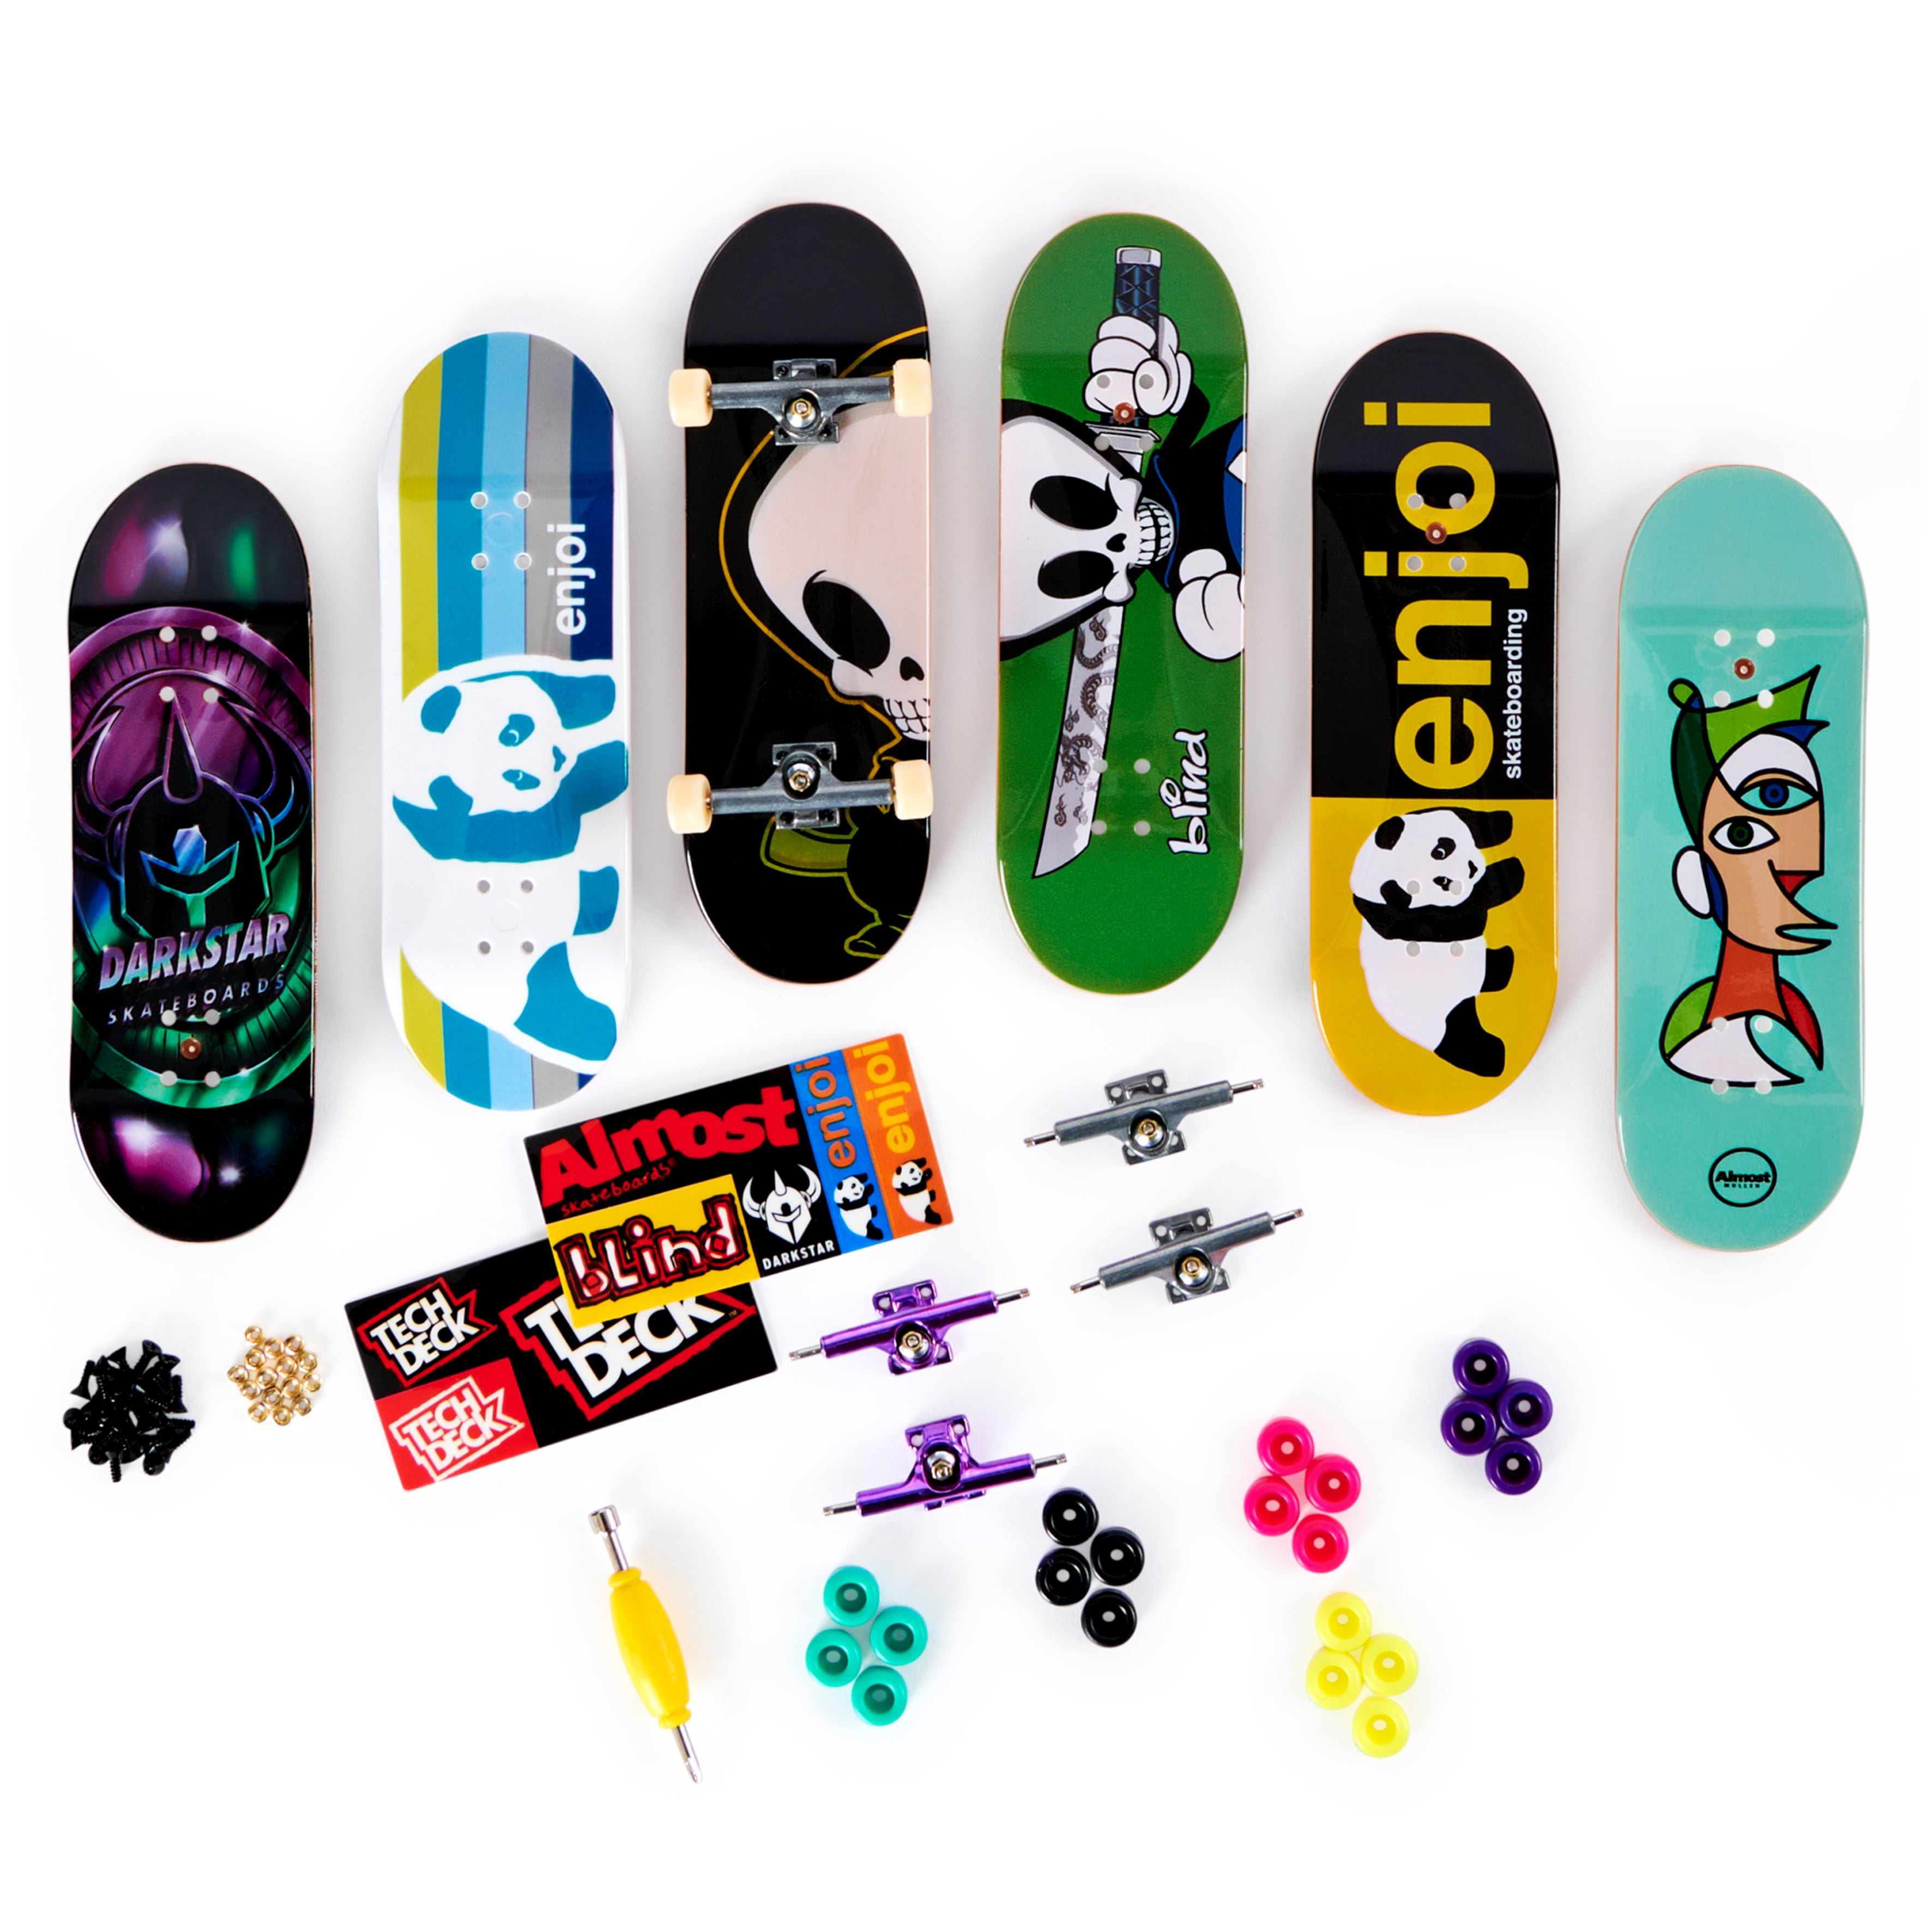 FREE SHIPPING! Tech Deck 6 Pack SK8SHOP Cool Toy Good Detail Skateboard NEW 